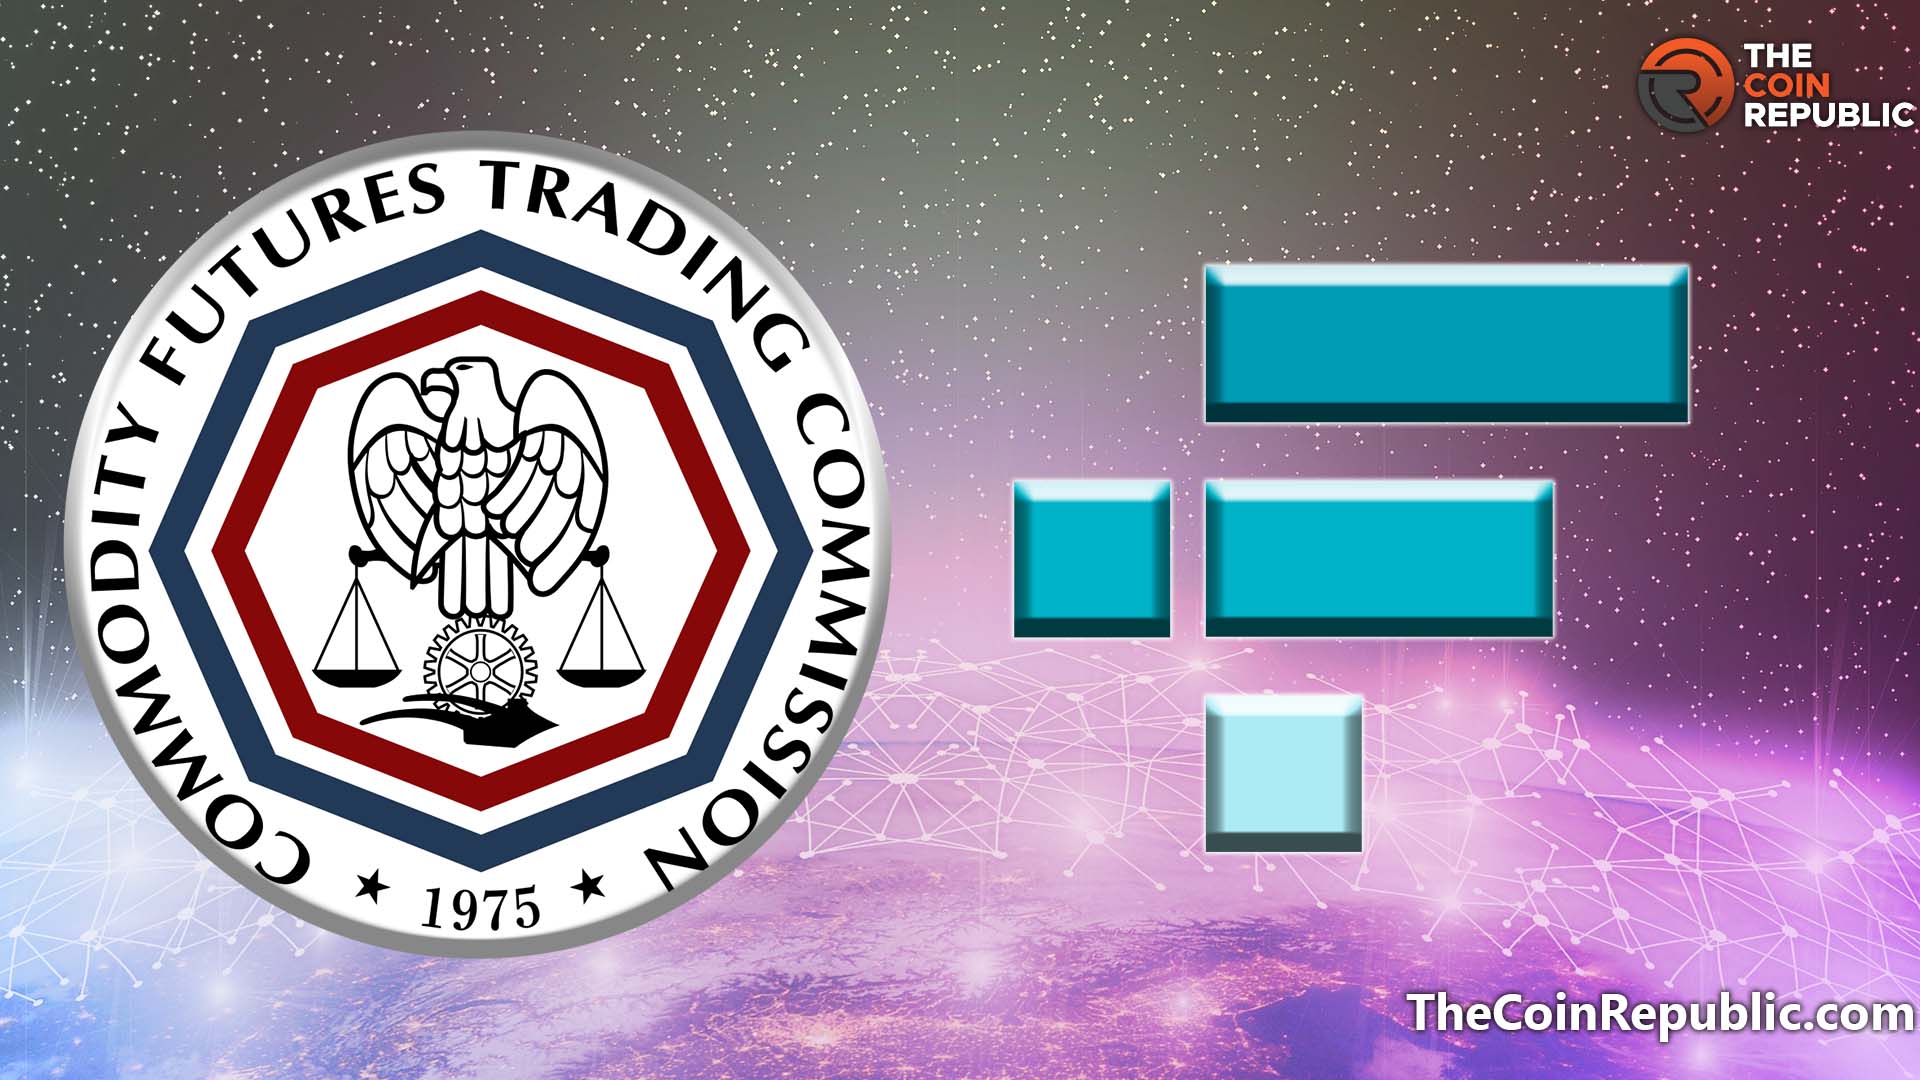 CFTC Chairman: FTX US Derivatives is healthy because of CFTC’s oversight